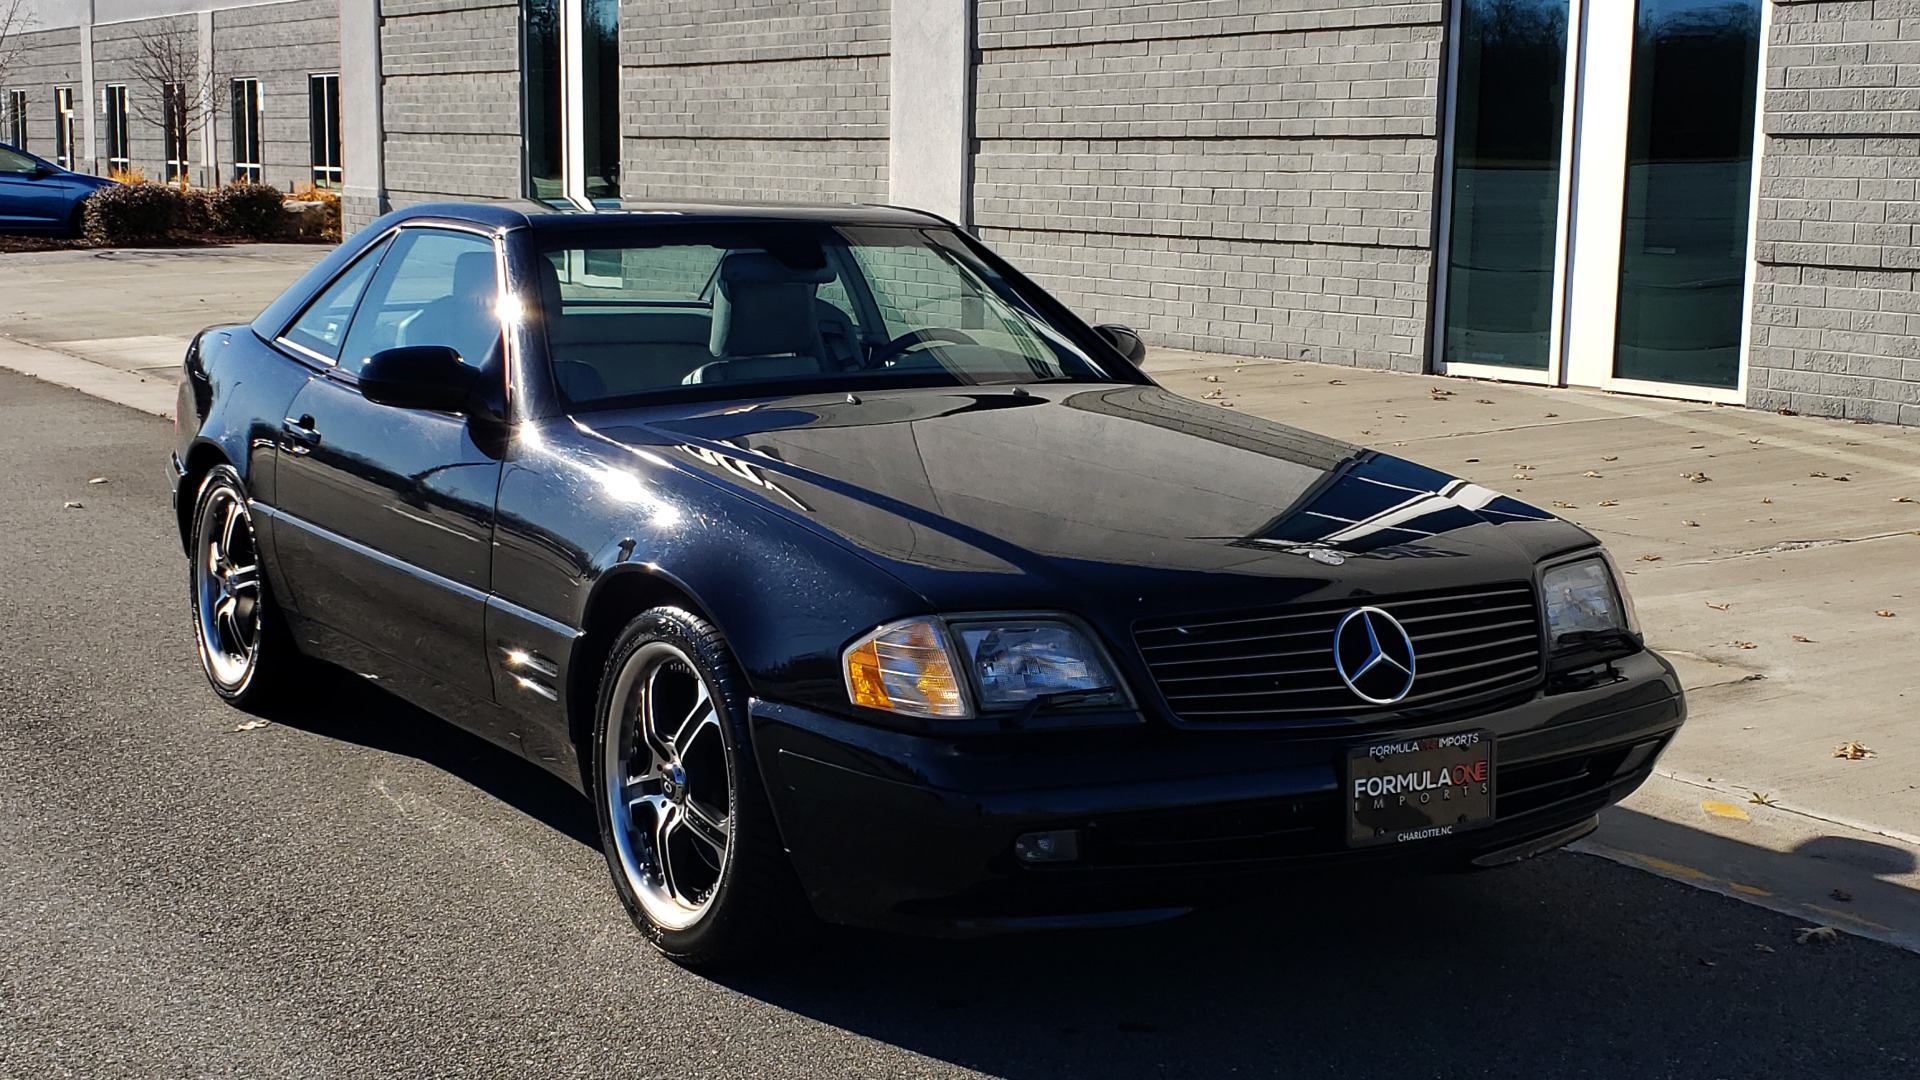 Used 1999 Mercedes-Benz SL-CLASS ROADSTER / 5.0L V8 (302HP) / 5-SPD AUTO / 18IN WHEELS for sale Sold at Formula Imports in Charlotte NC 28227 4